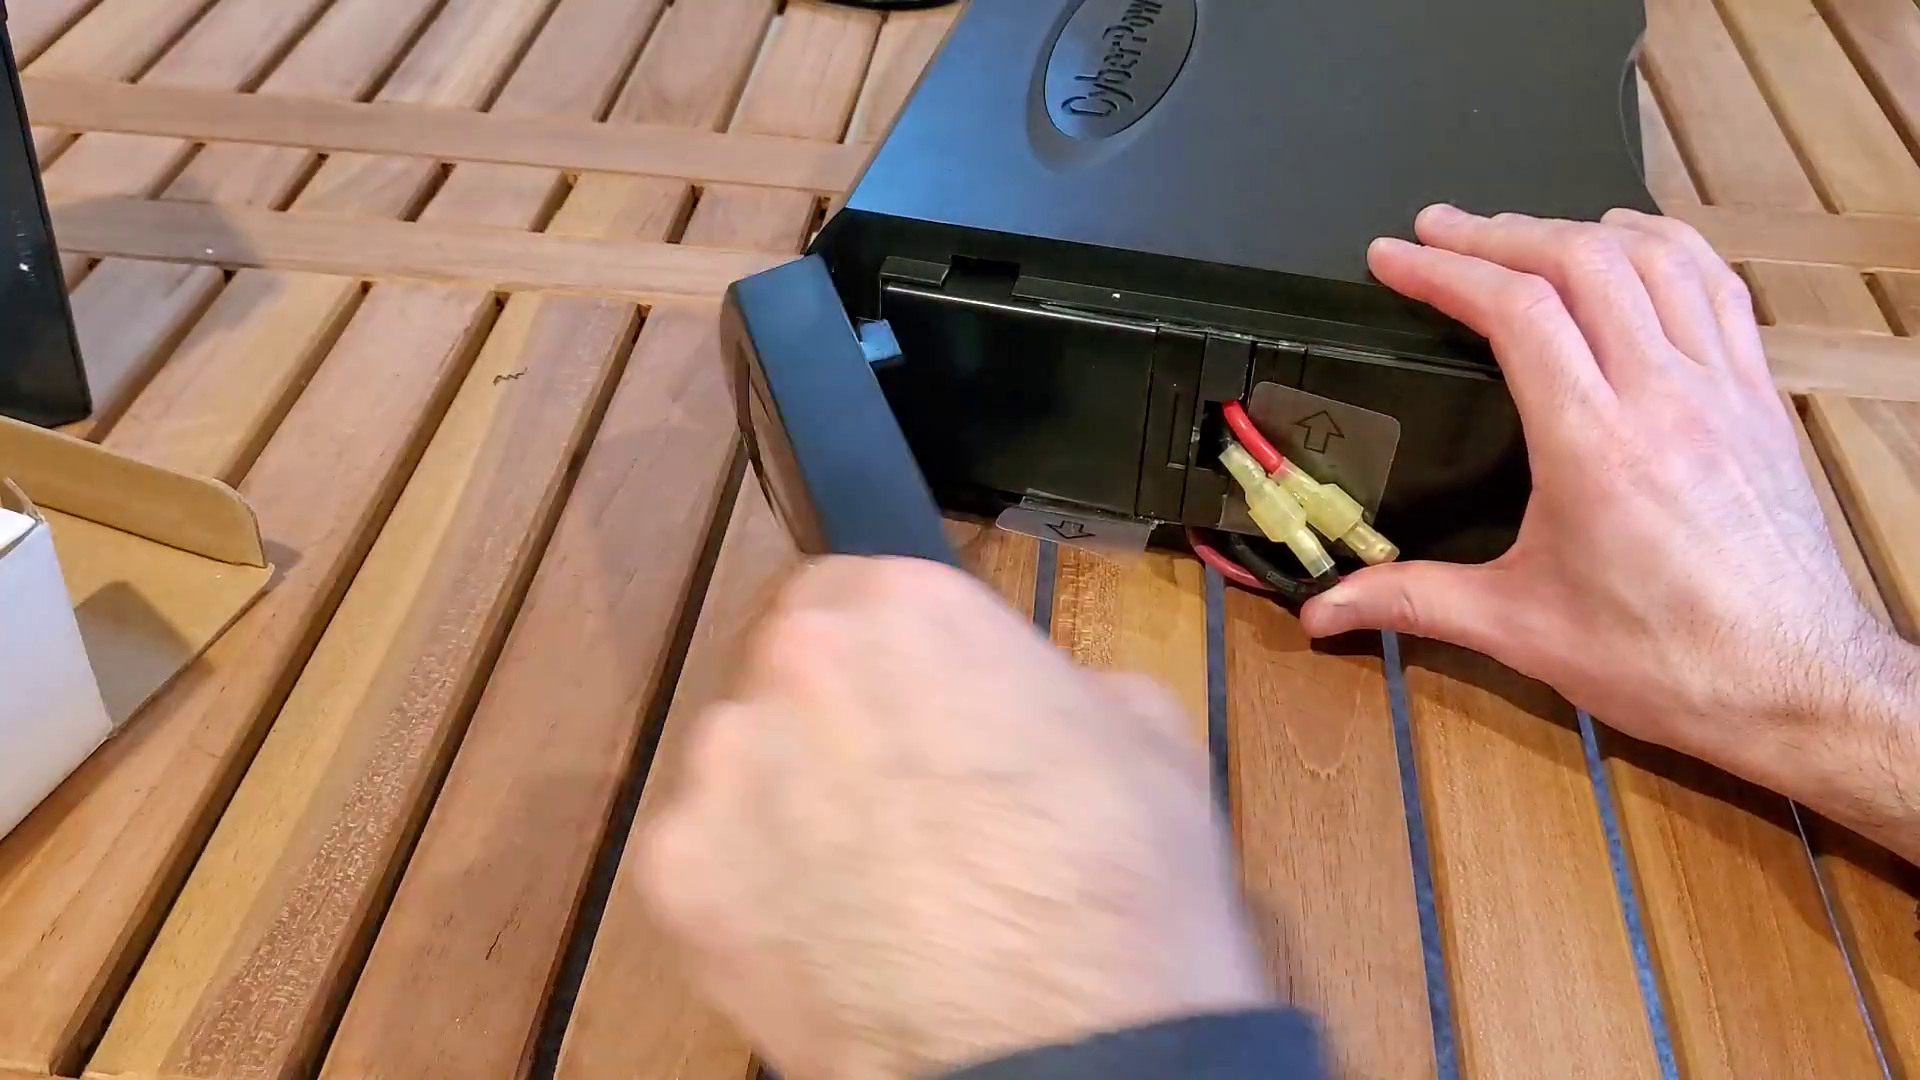 placing the front panel back on the UPS, part of the How to Replace a CyberPower 1500AV UPS Battery article